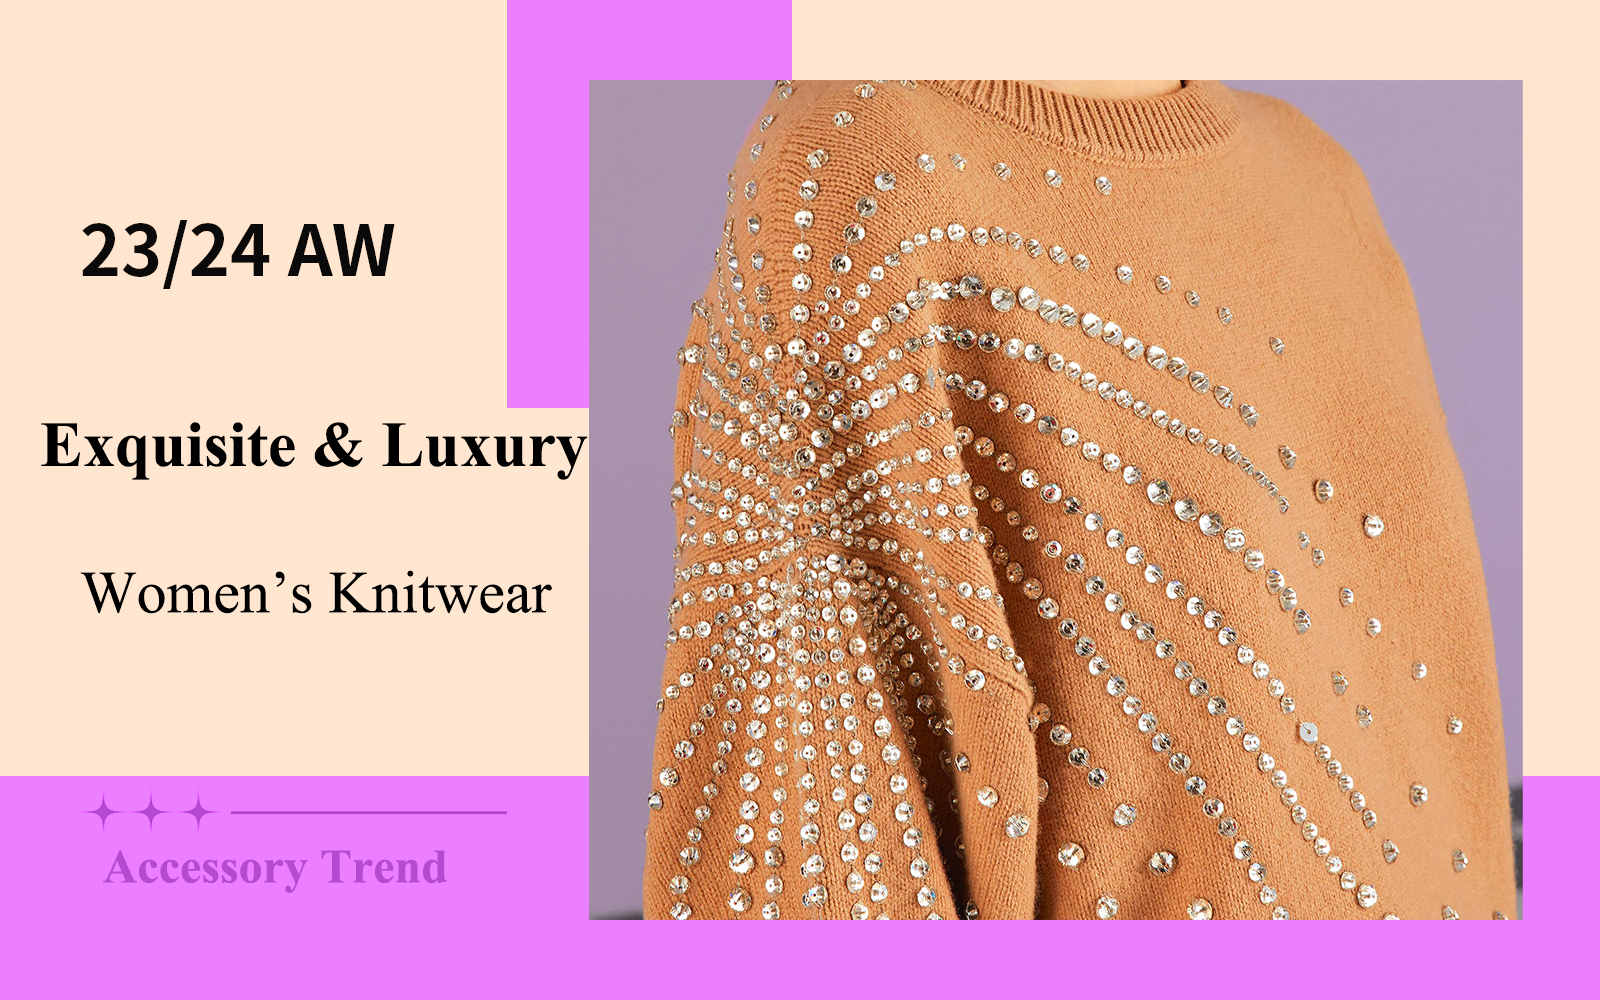 Exquisite & Luxury -- The Accessory Trend for Women's Knitwear